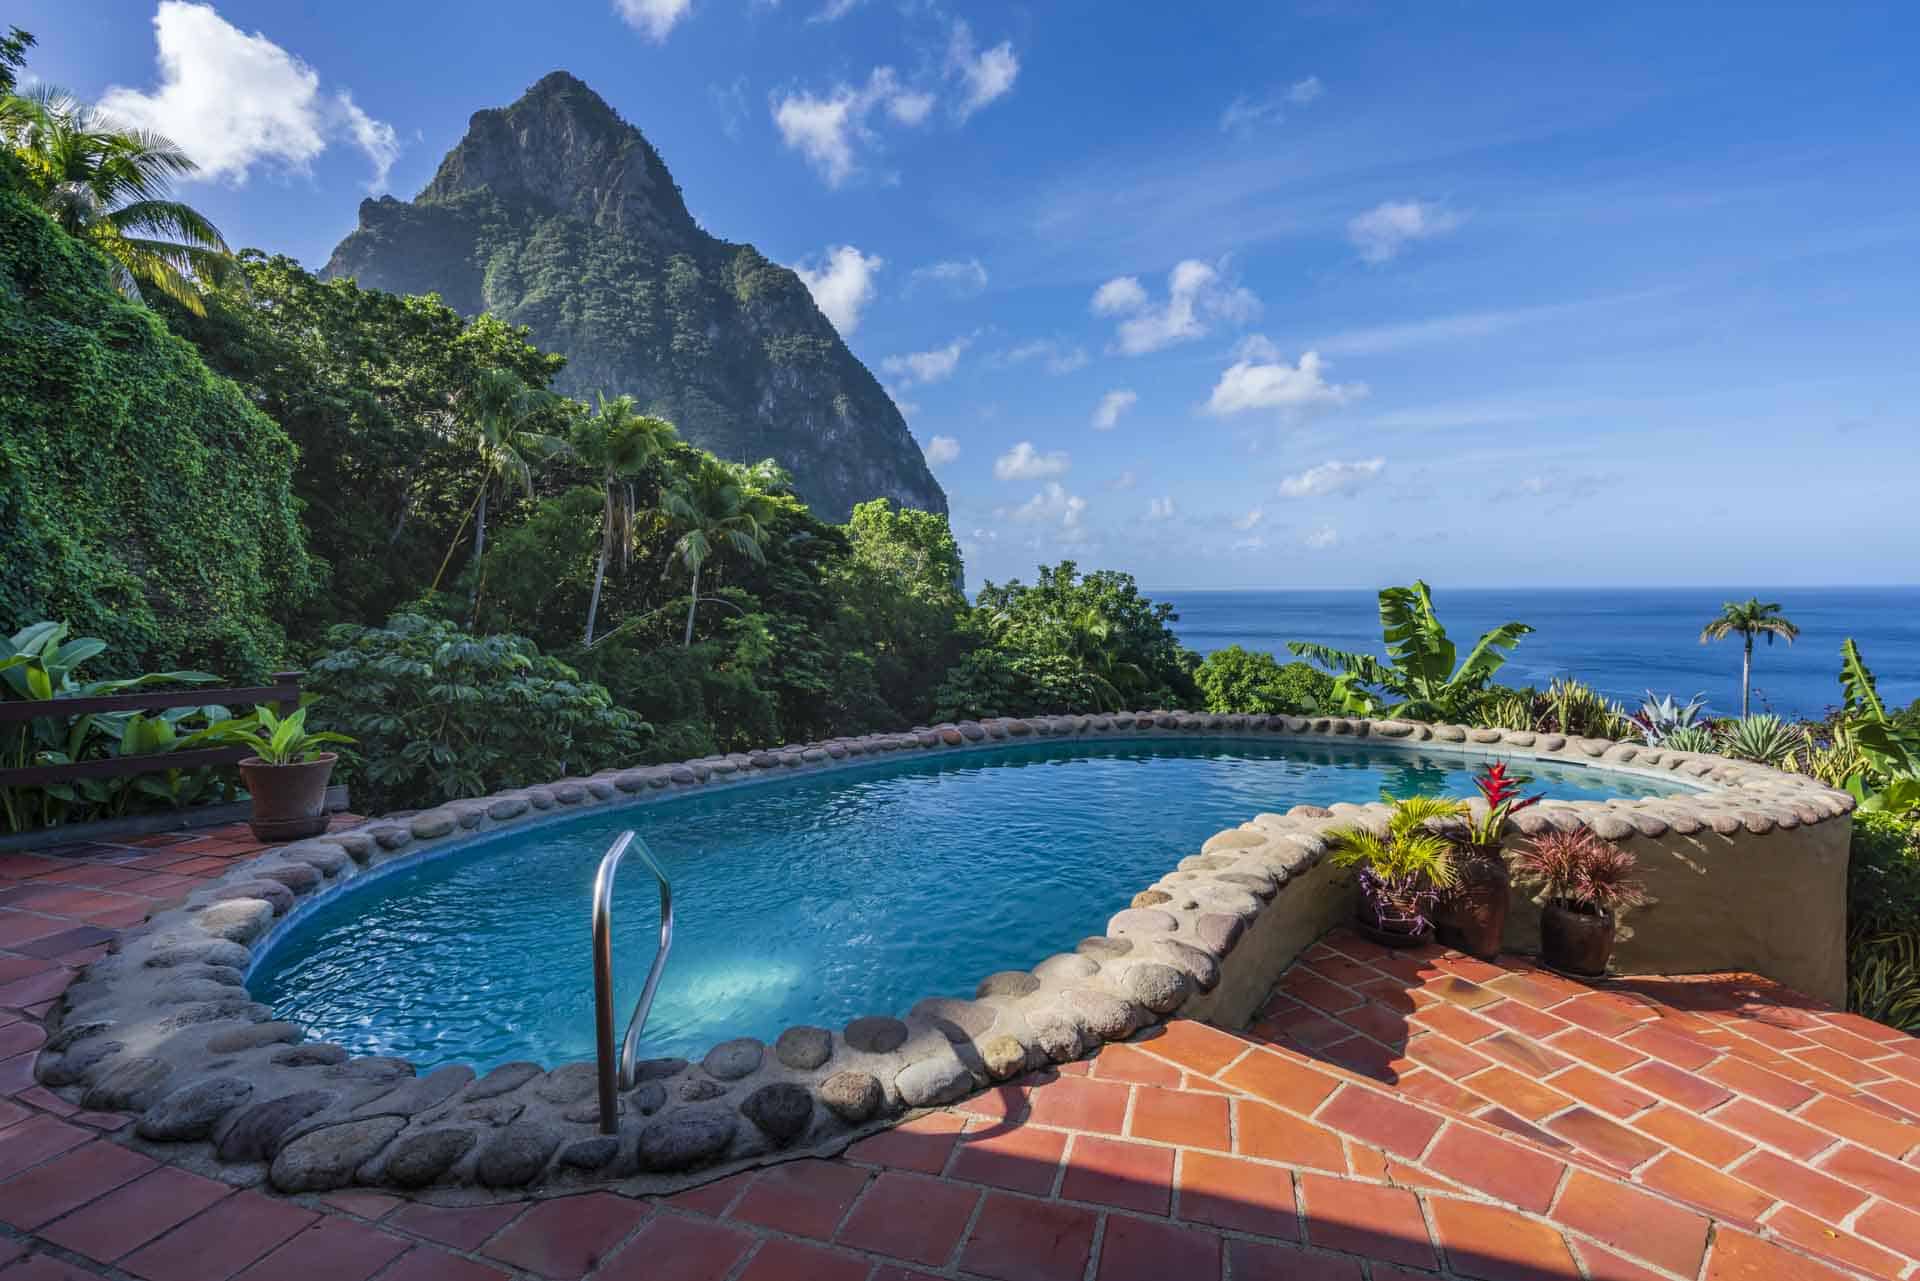 st lucia is the most beautiful of all tropical islands in the world